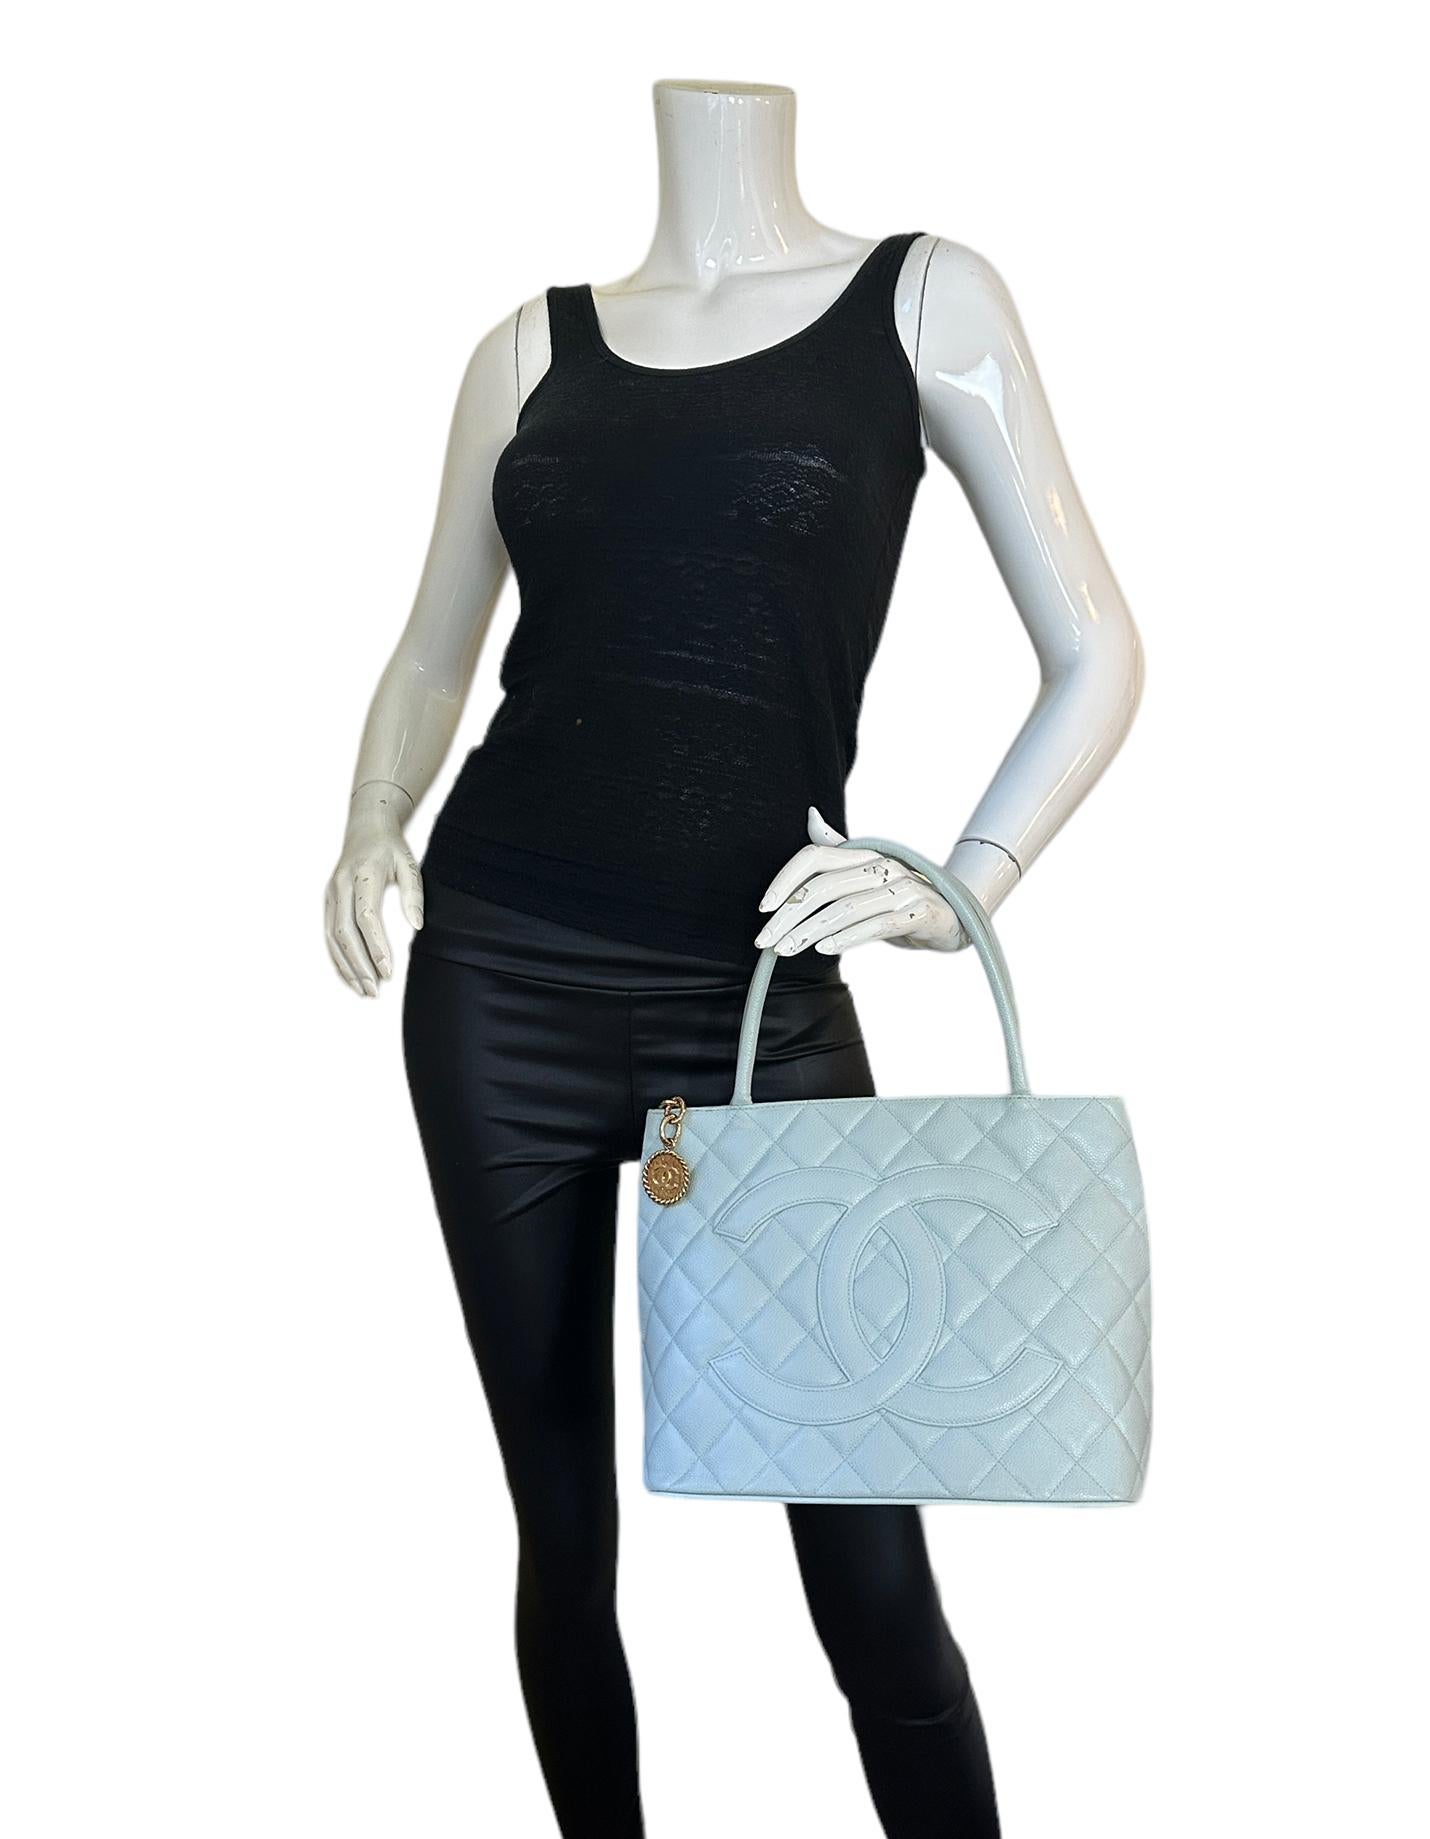 Chanel Light Blue Caviar Leather CC Medallion Tote Bag 

Made In: France
Color: Light blue
Hardware: Goldtone
Materials: Caviar Leather
Lining: Leather
Closure/Opening: Top zip
Exterior Pockets: One flat pocket
Interior Pockets: One zip pocket, one